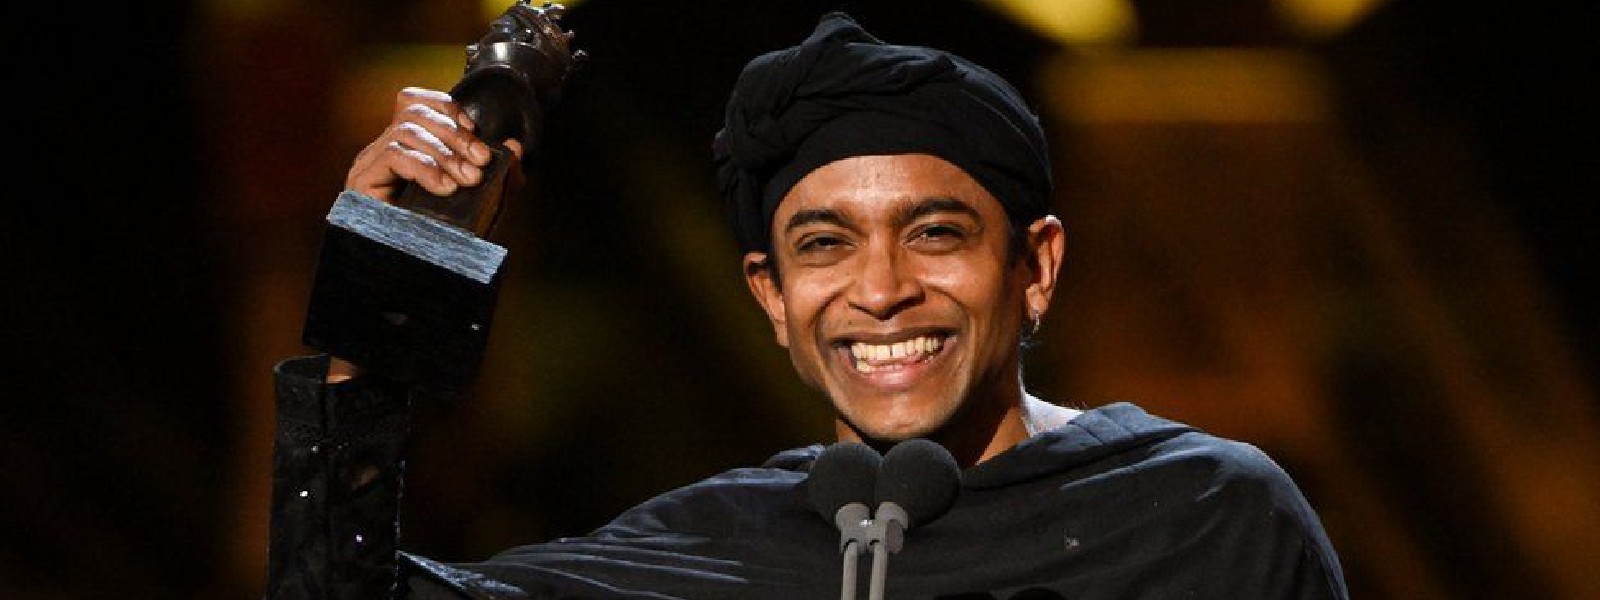 Olivier Awards Best Actor Hiran Abeysekera in Sri Lanka to support Galle Face protest